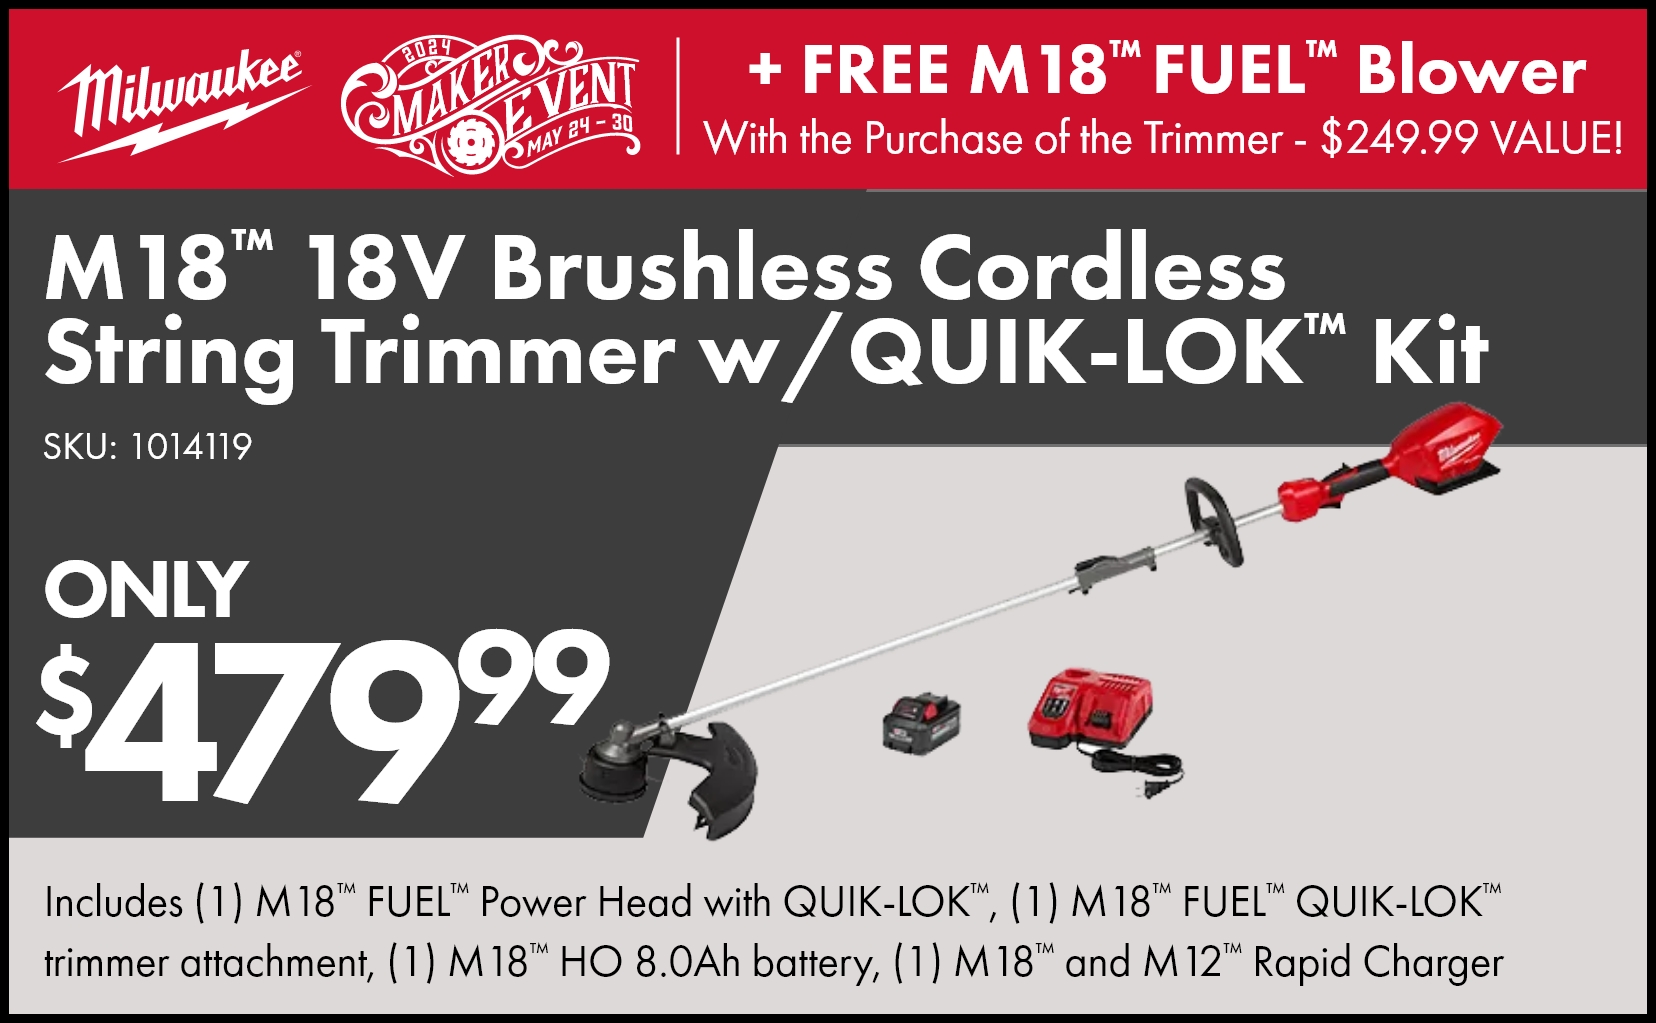 Purchase the Milwaukee® M18 FUEL™ 18 Volt Lithium Ion Brushless Cordless String Trimmer w/ QUIK-LOK™ Kit and get a Milwaukee® M18 FUEL™ Blower for FREE!